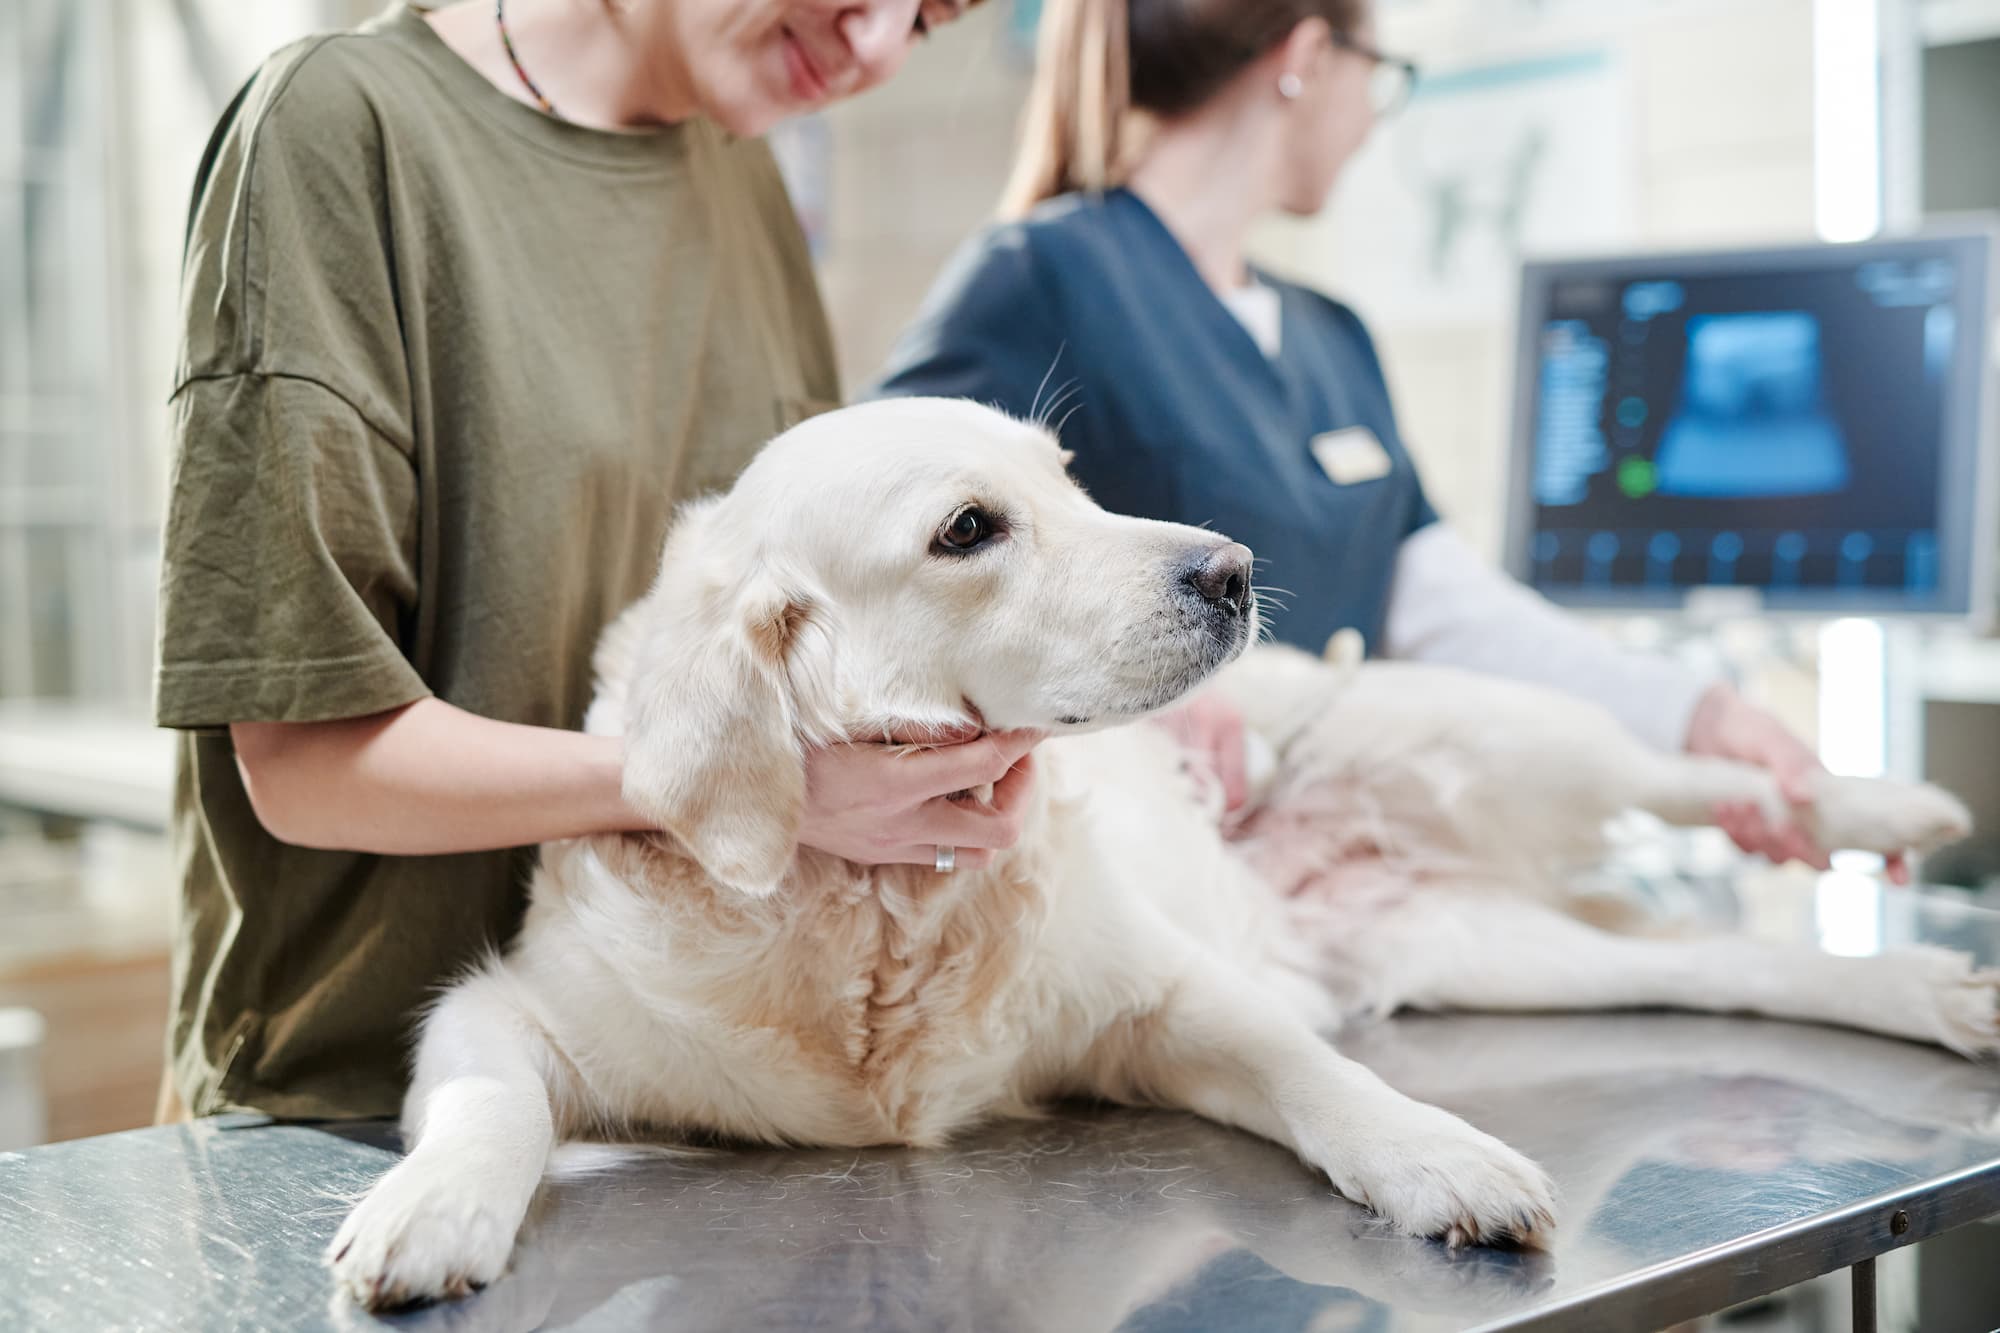 Signs of & treatments for hip dysplasia in dogs